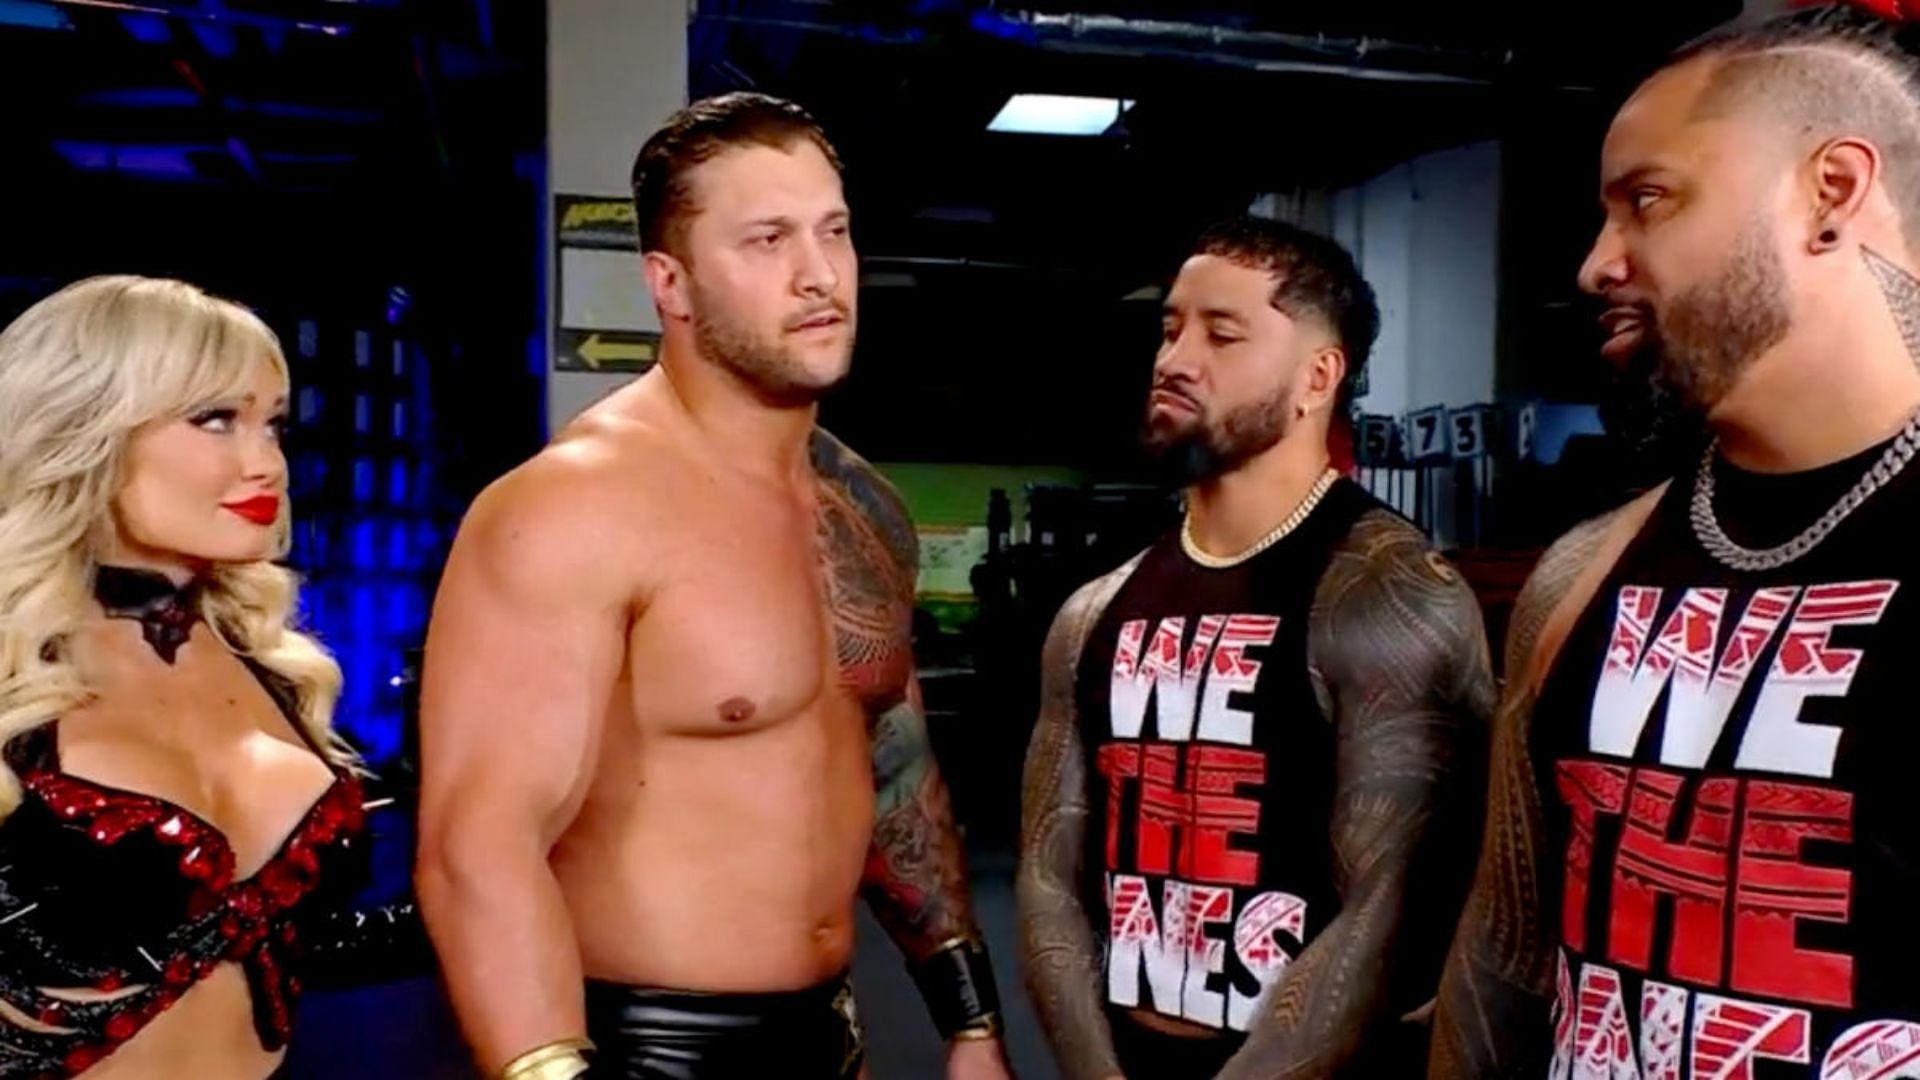 The seeds of a potential feud with The Bloodline were planted on SmackDown.